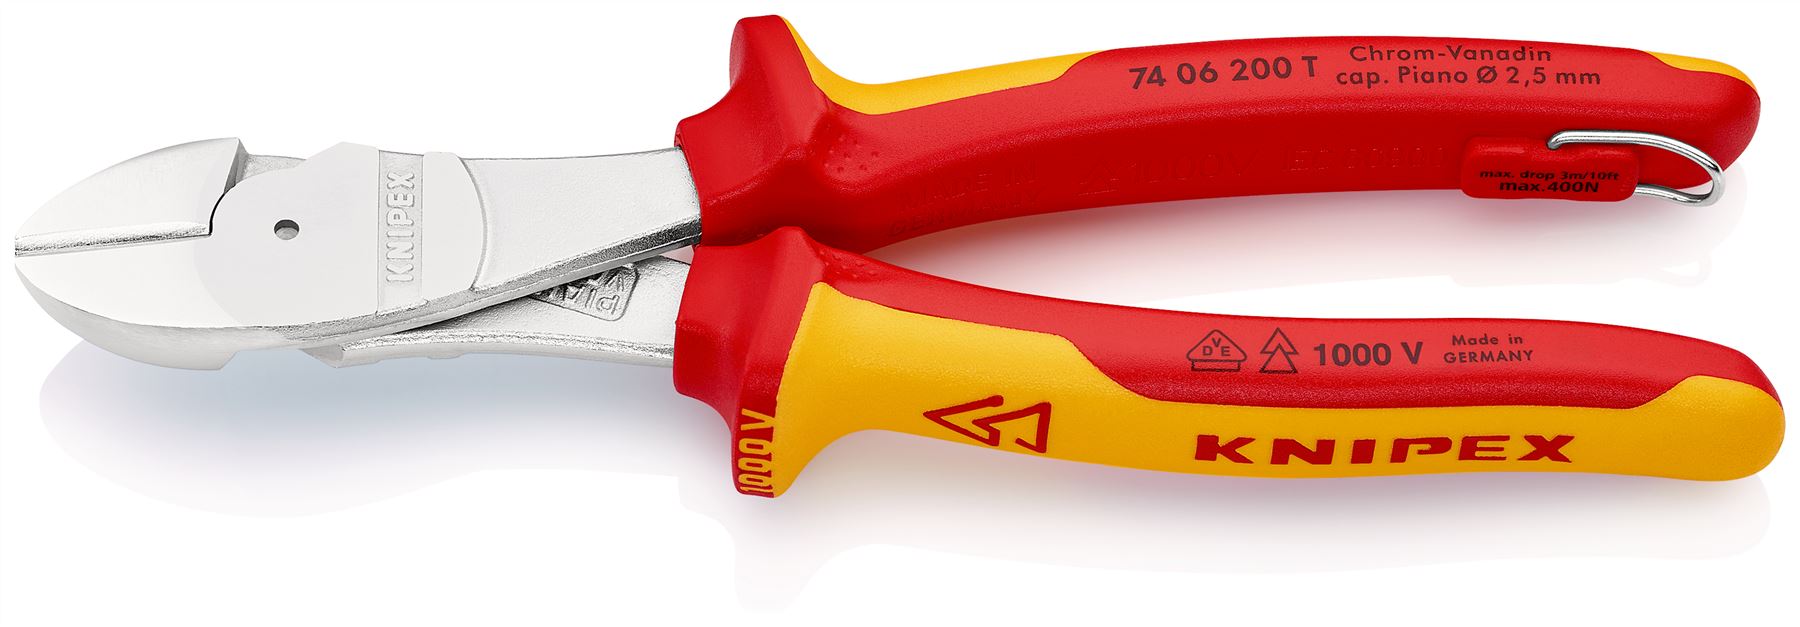 Knipex High Leverage Diagonal Cutter 200mm VDE Insulated 1000V with Tether Point 74 06 200 T